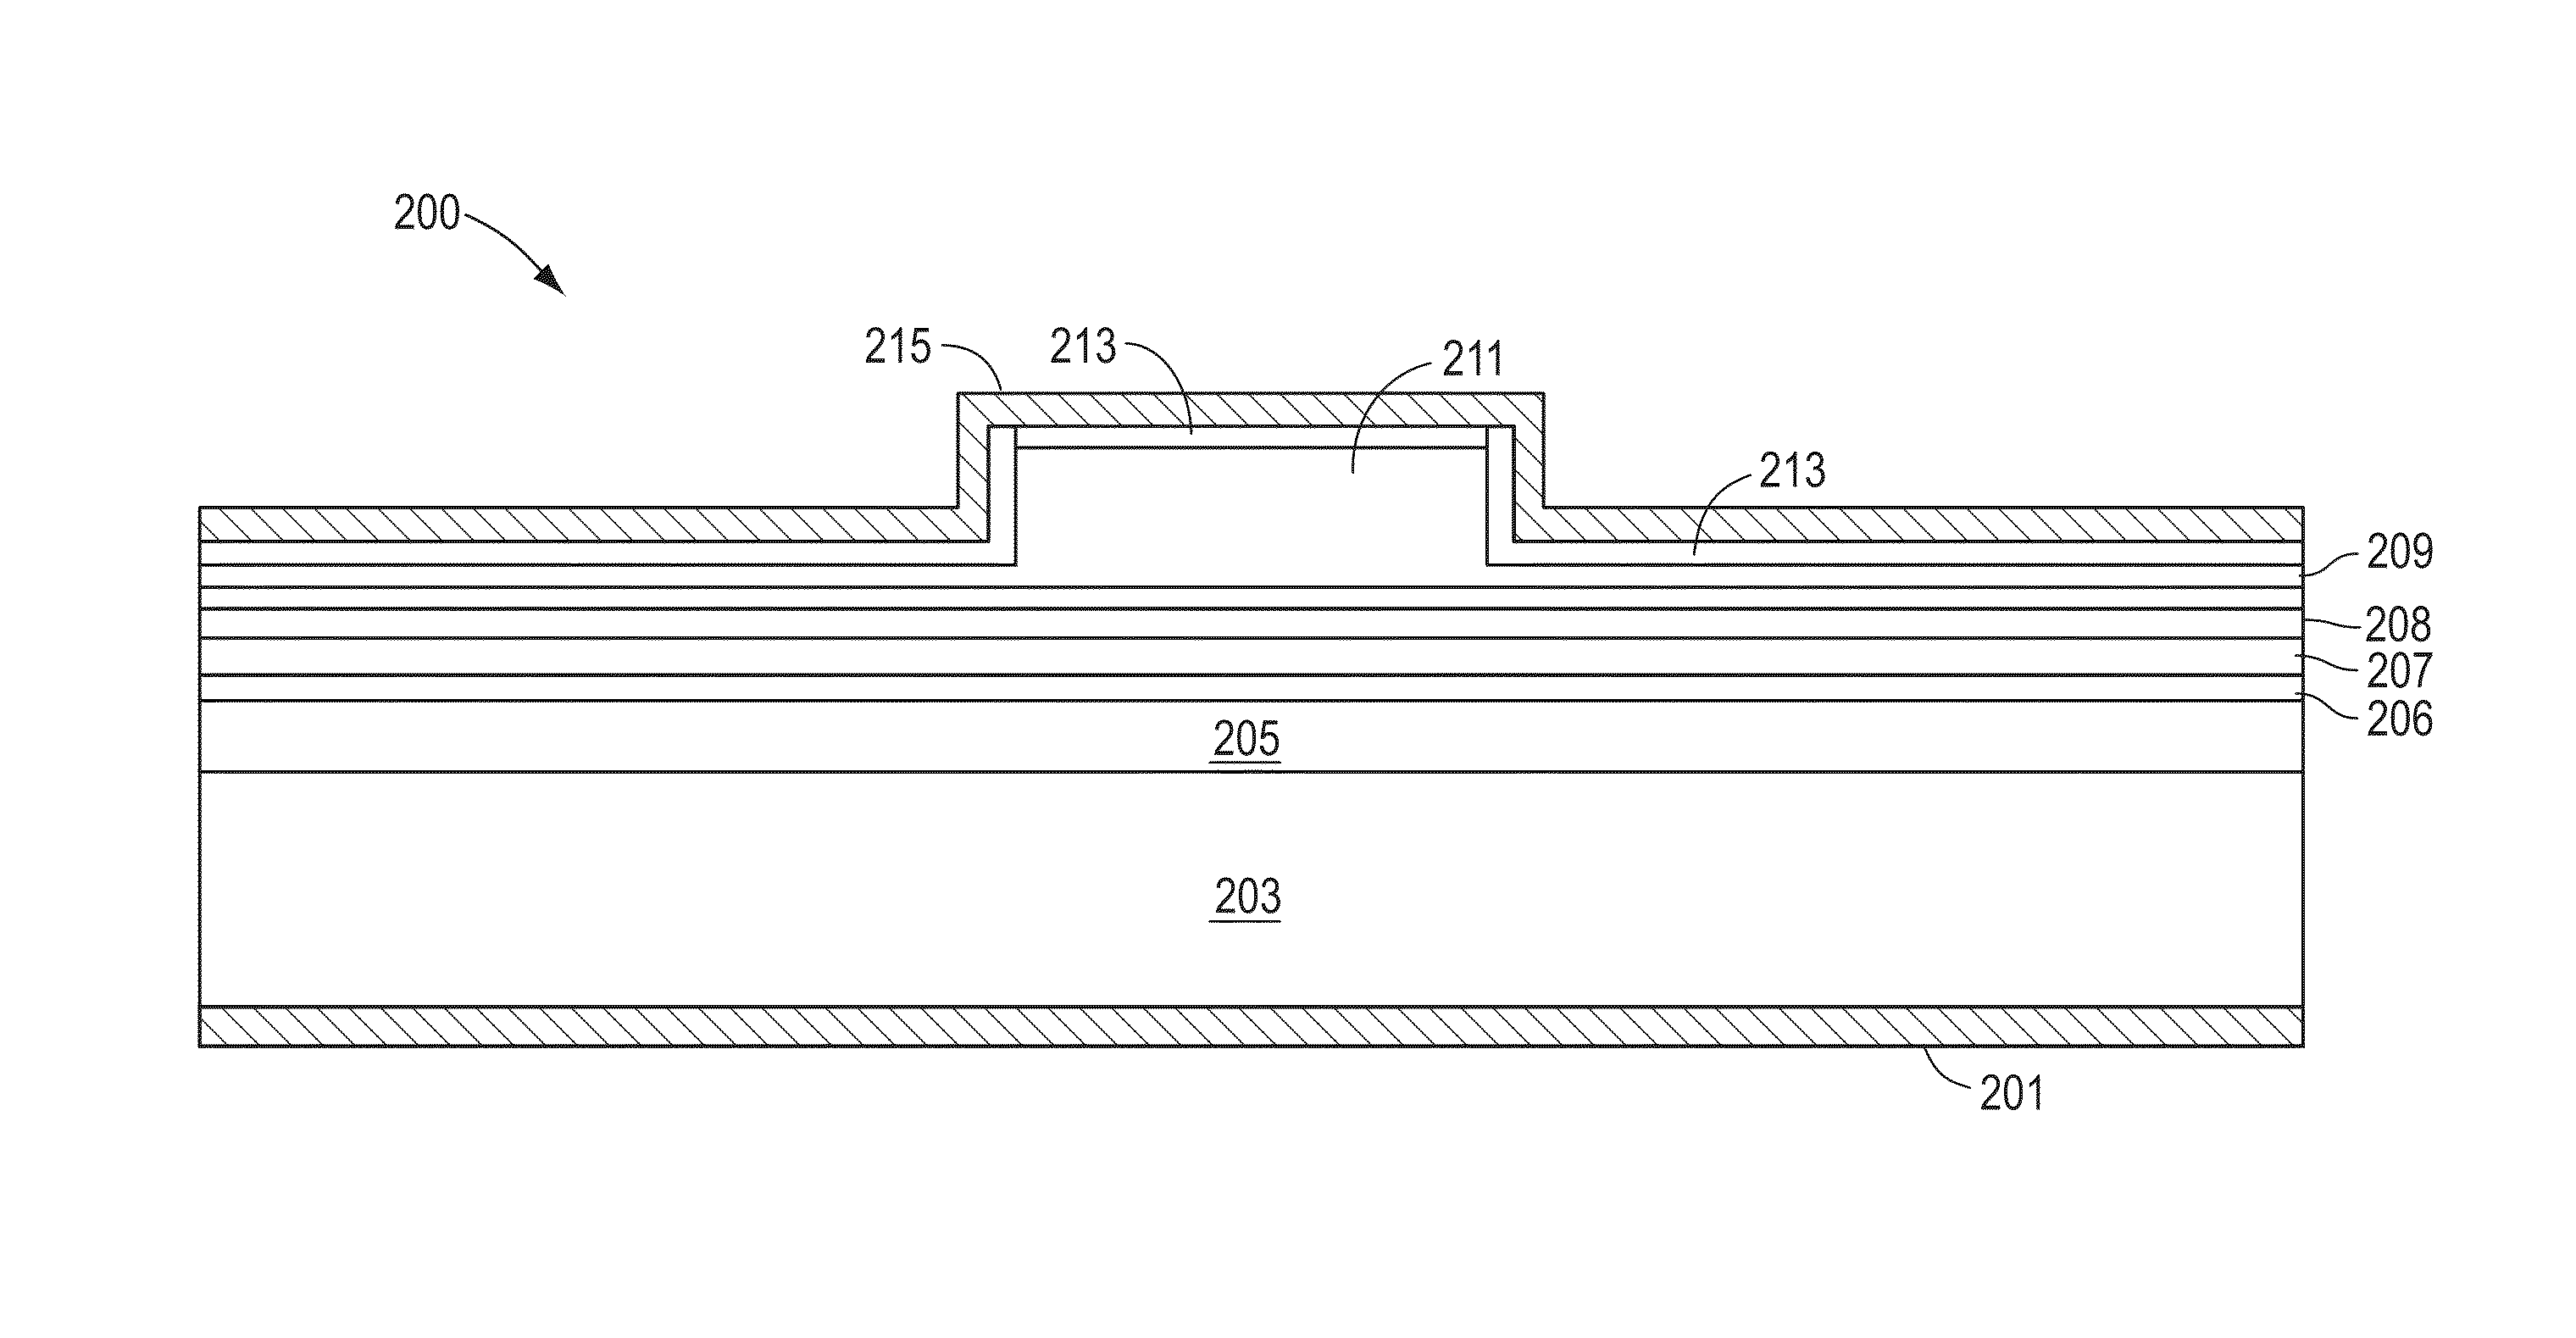 Optical device structure using GaN substrates for laser applications